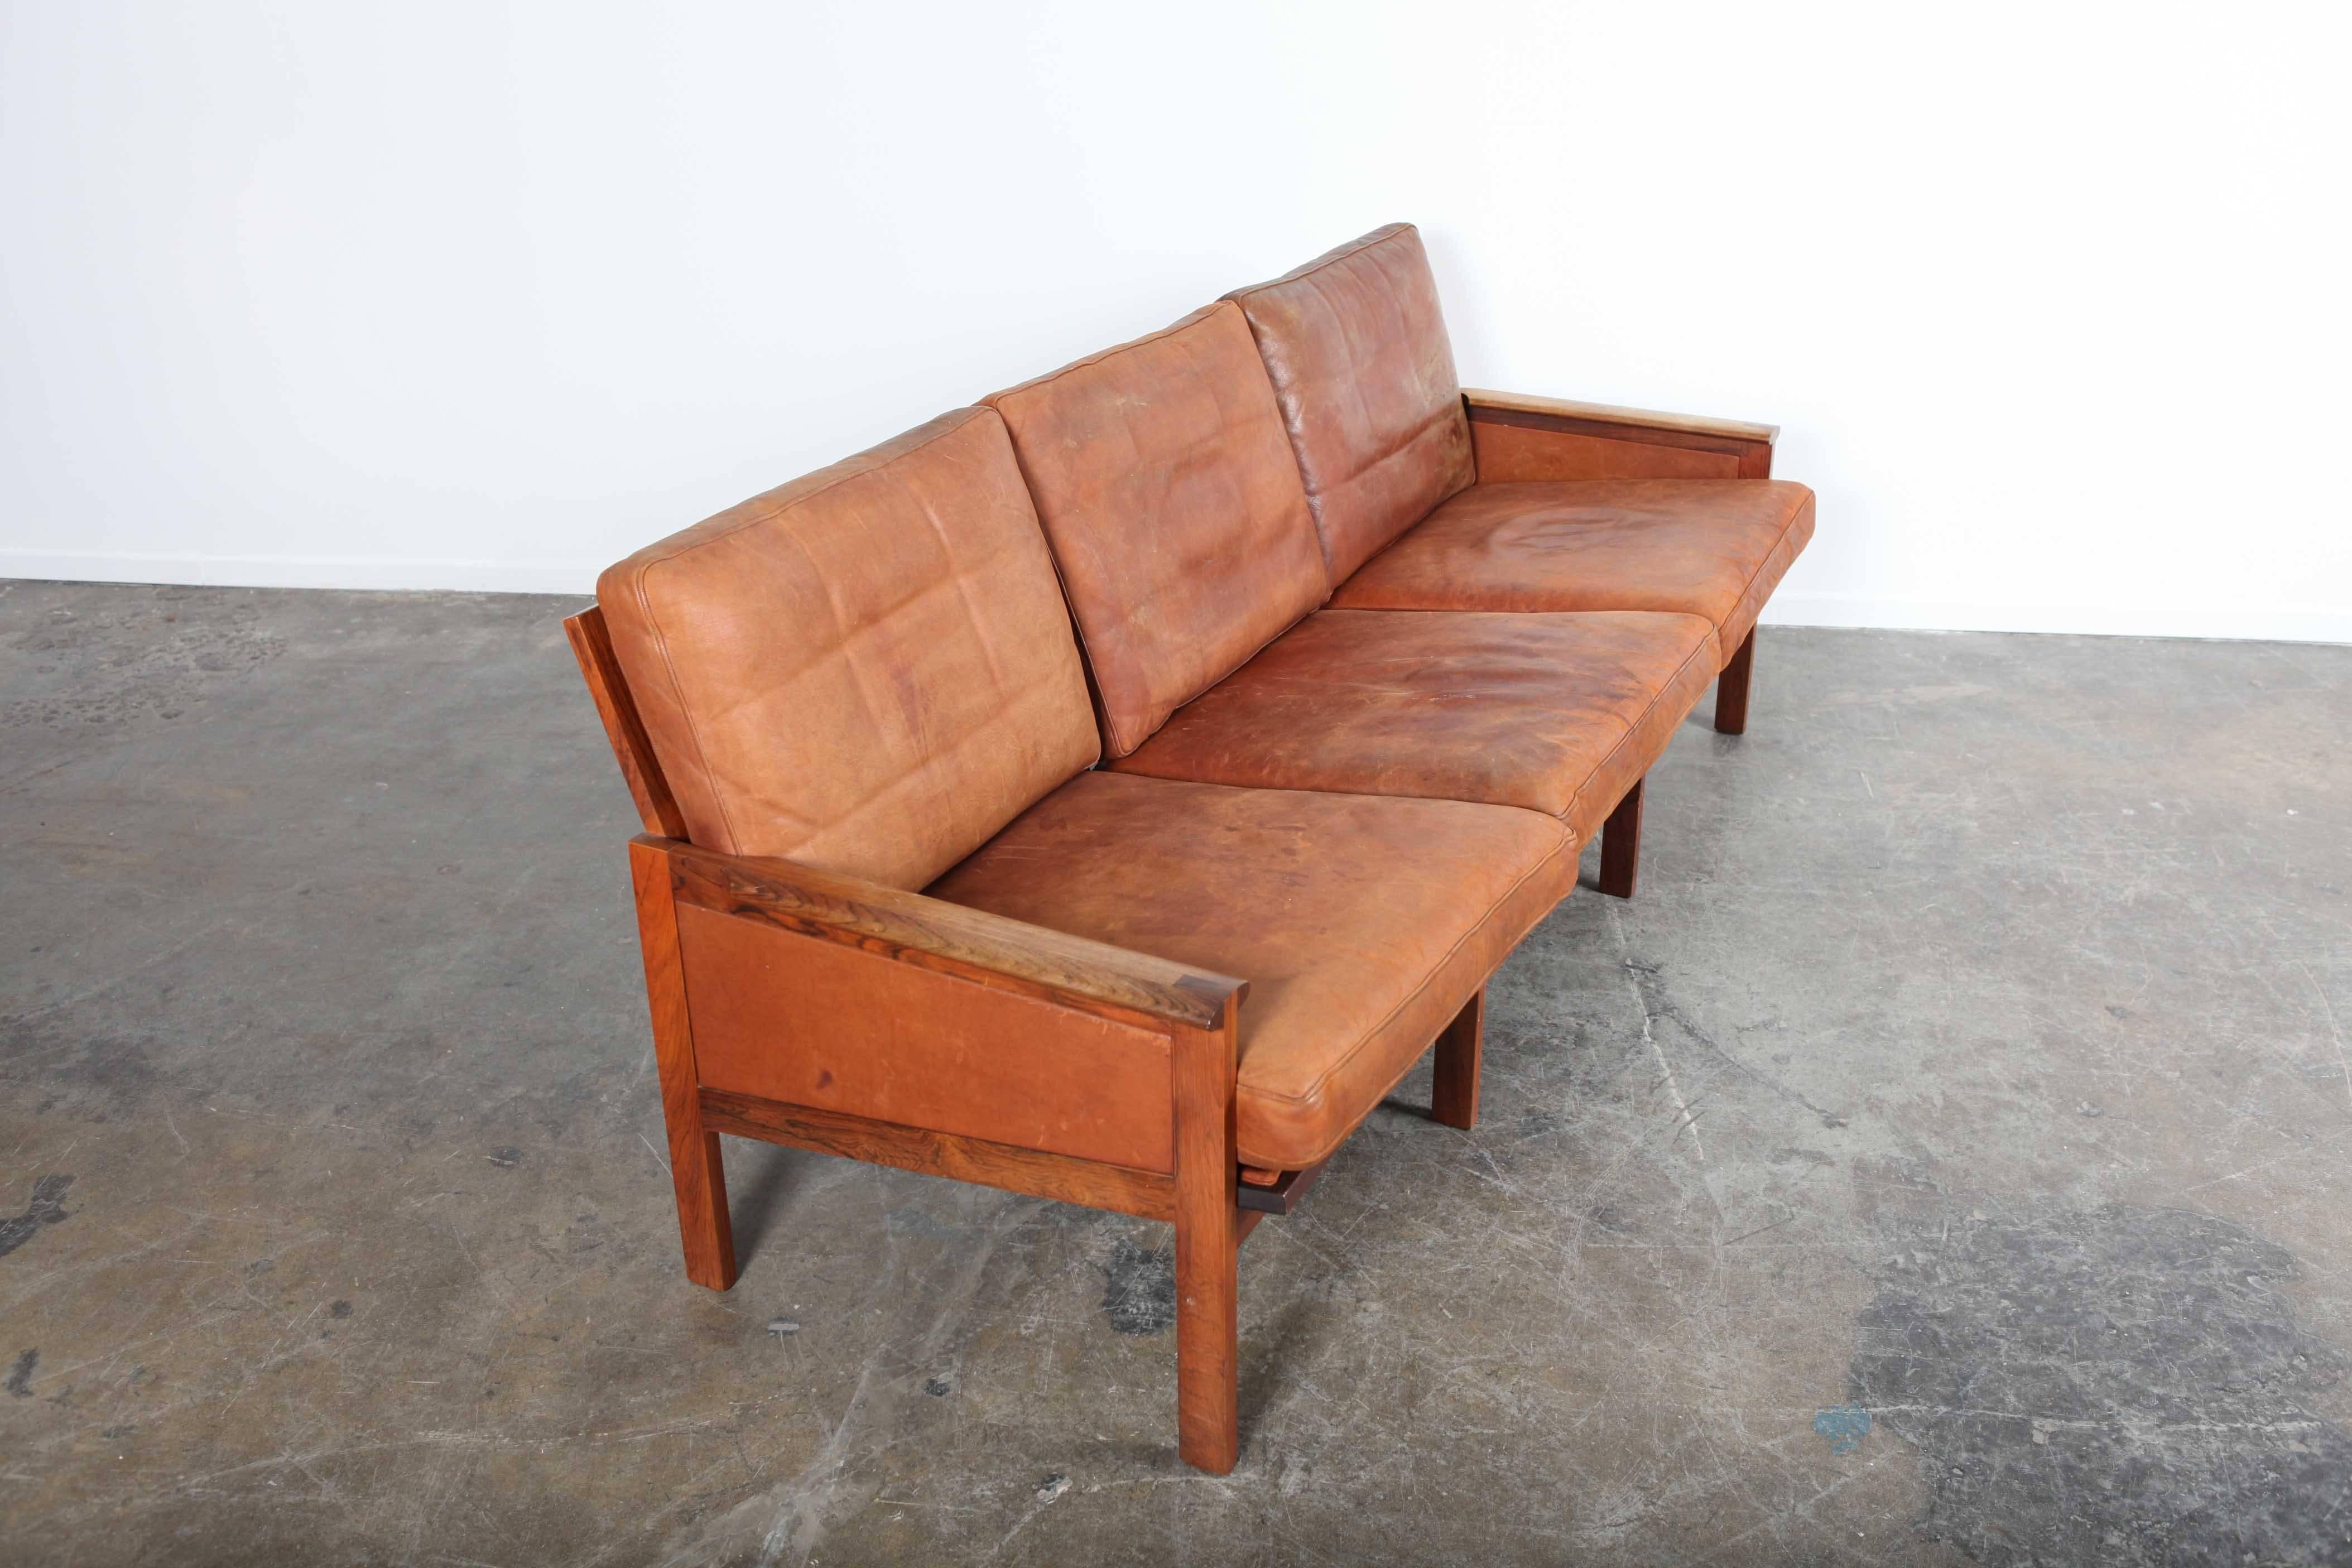 Danish leather sofa with solid rosewood frame by Illum Wikkelso for Niels Eilersen. Original leather.